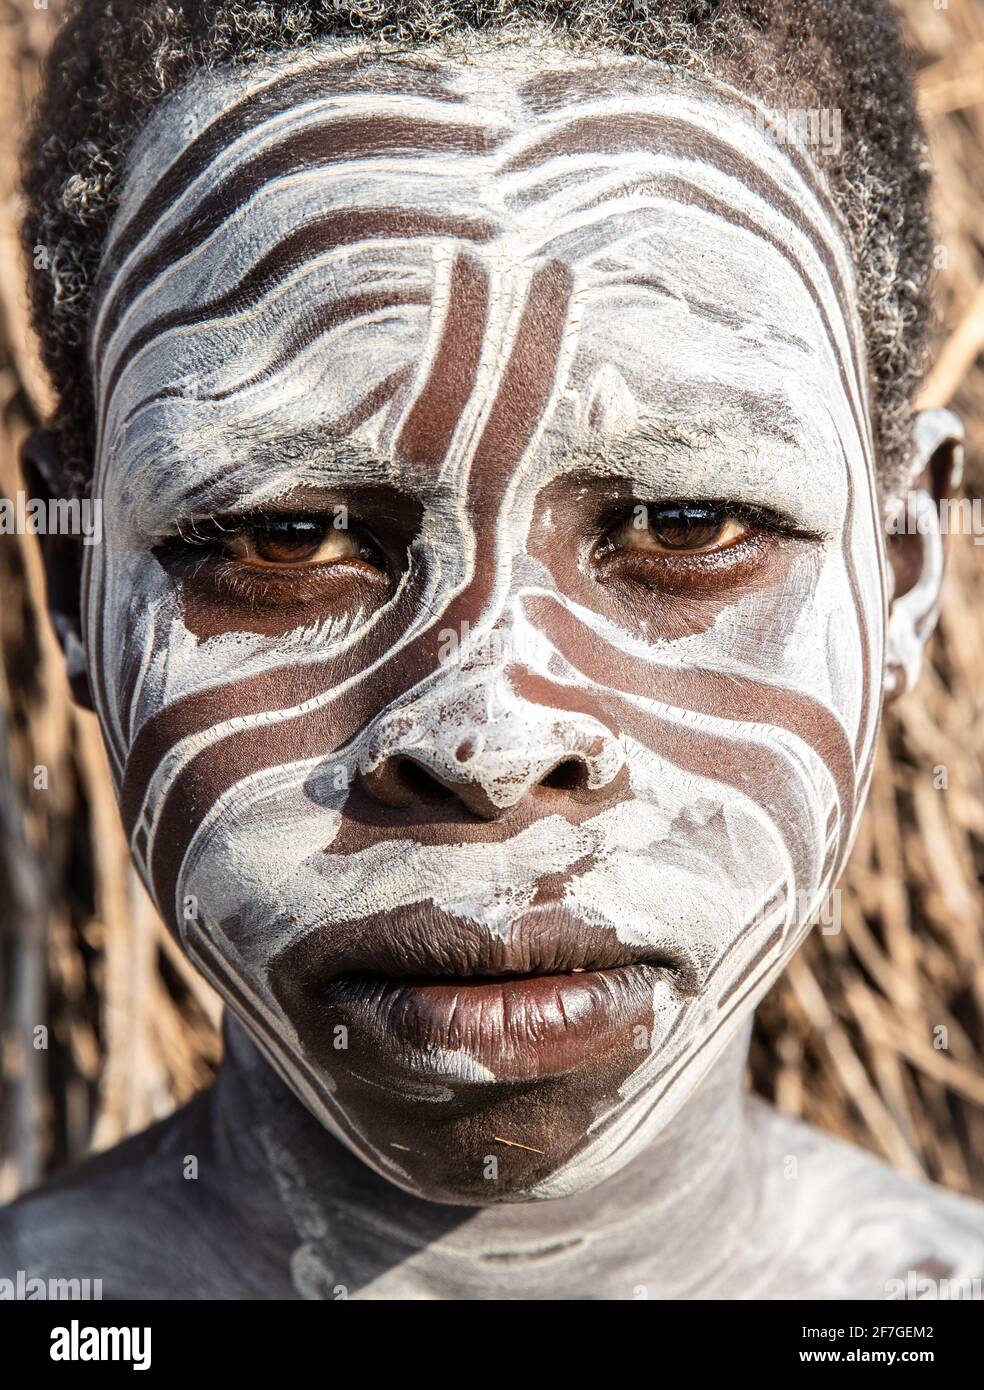 Decorative patterns are created using the white clay paint. It's possible this is attractive to lucrative visiting tourists. OMO VALLEY, ETHIOPIA: MEE Stock Photo